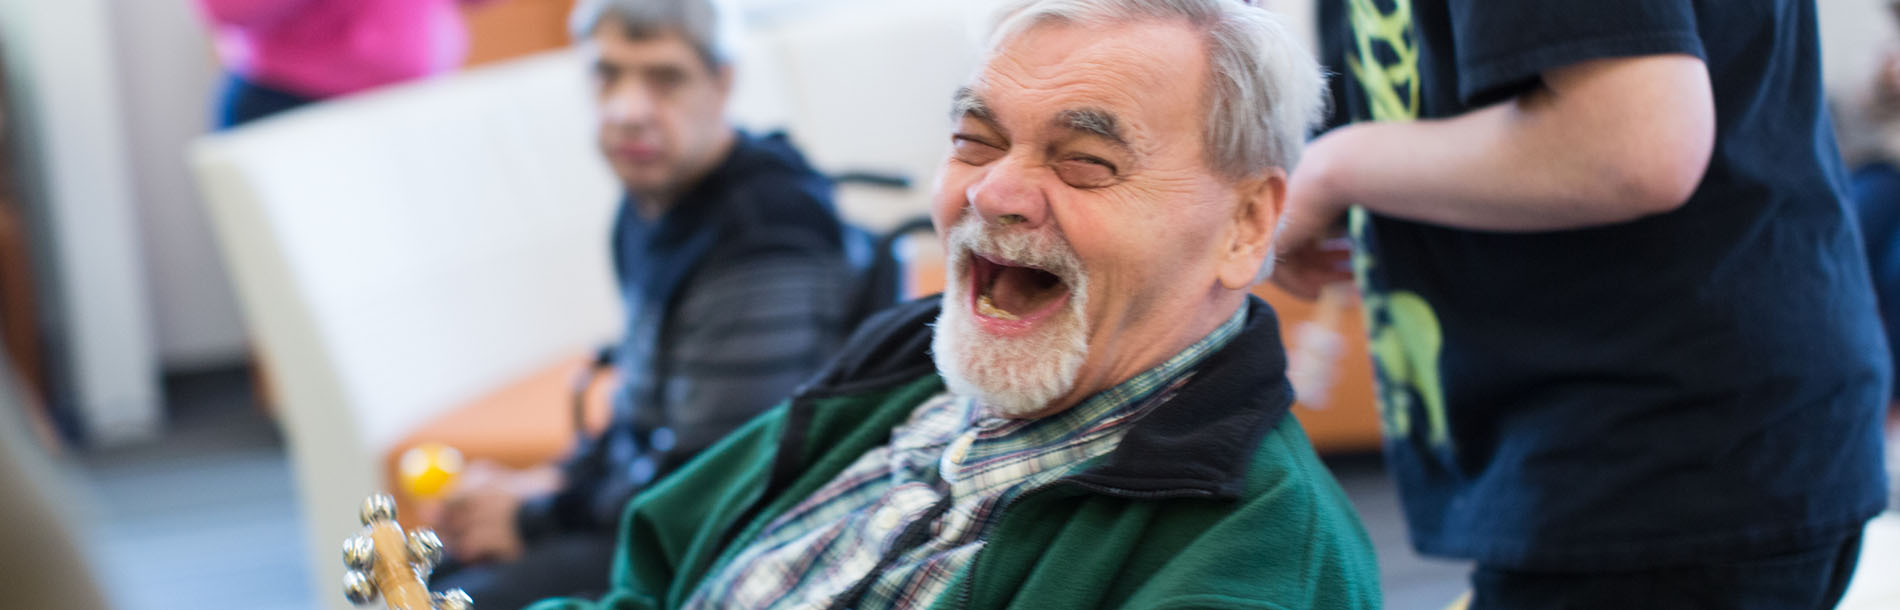 Man laughing for photo